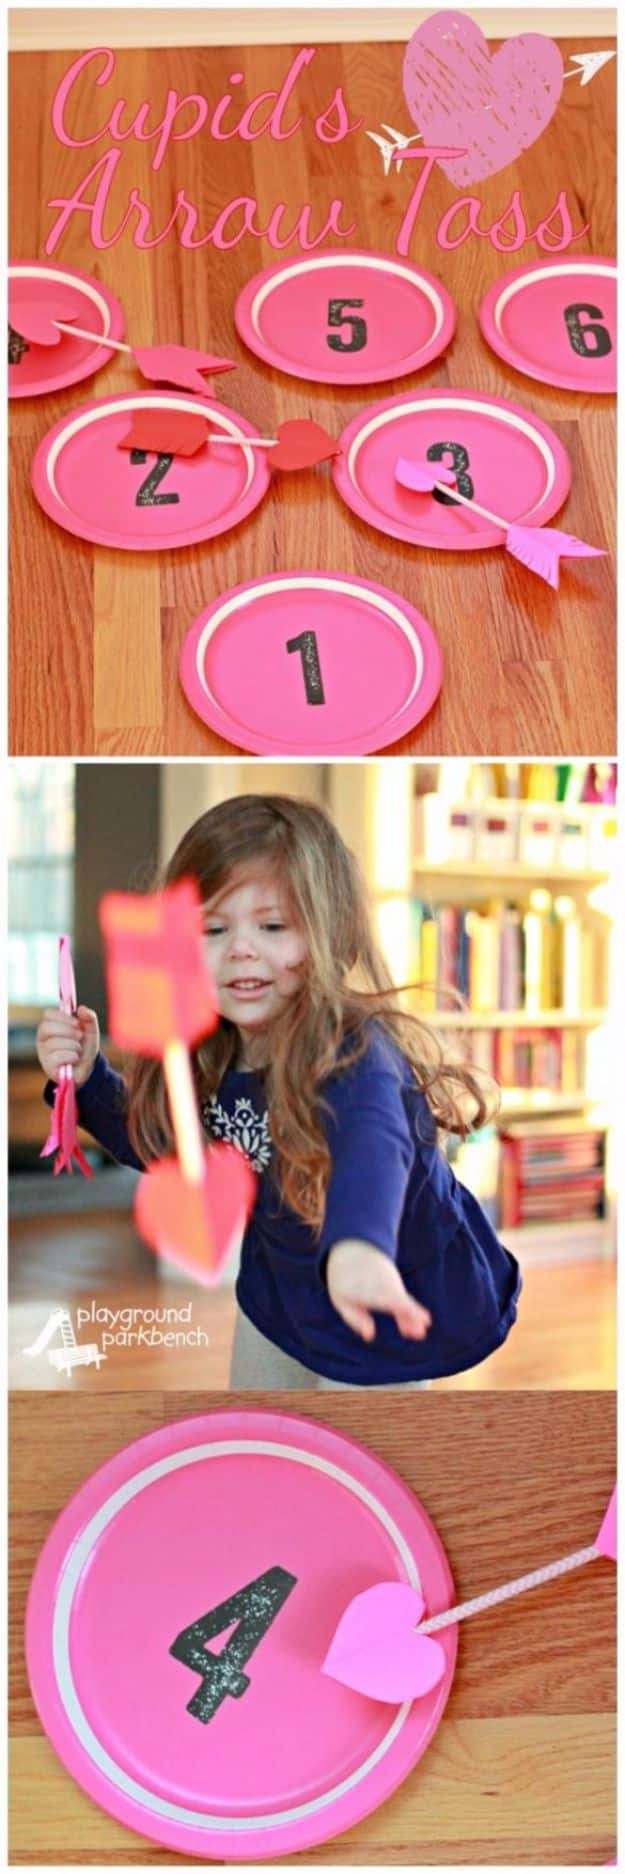 Cool Games To Make for Valentines Day - Cupid's Arrow Toss - Cheap and Easy Crafts For Valentine Parties - Ideas for Kids and Adults to Play Bingo, Matching, Free Printables and Cute Game Projects With Hearts, Red and Pink Art Ideas - Adorable Fun for The Holiday Celebrations #valentine #valentinesday